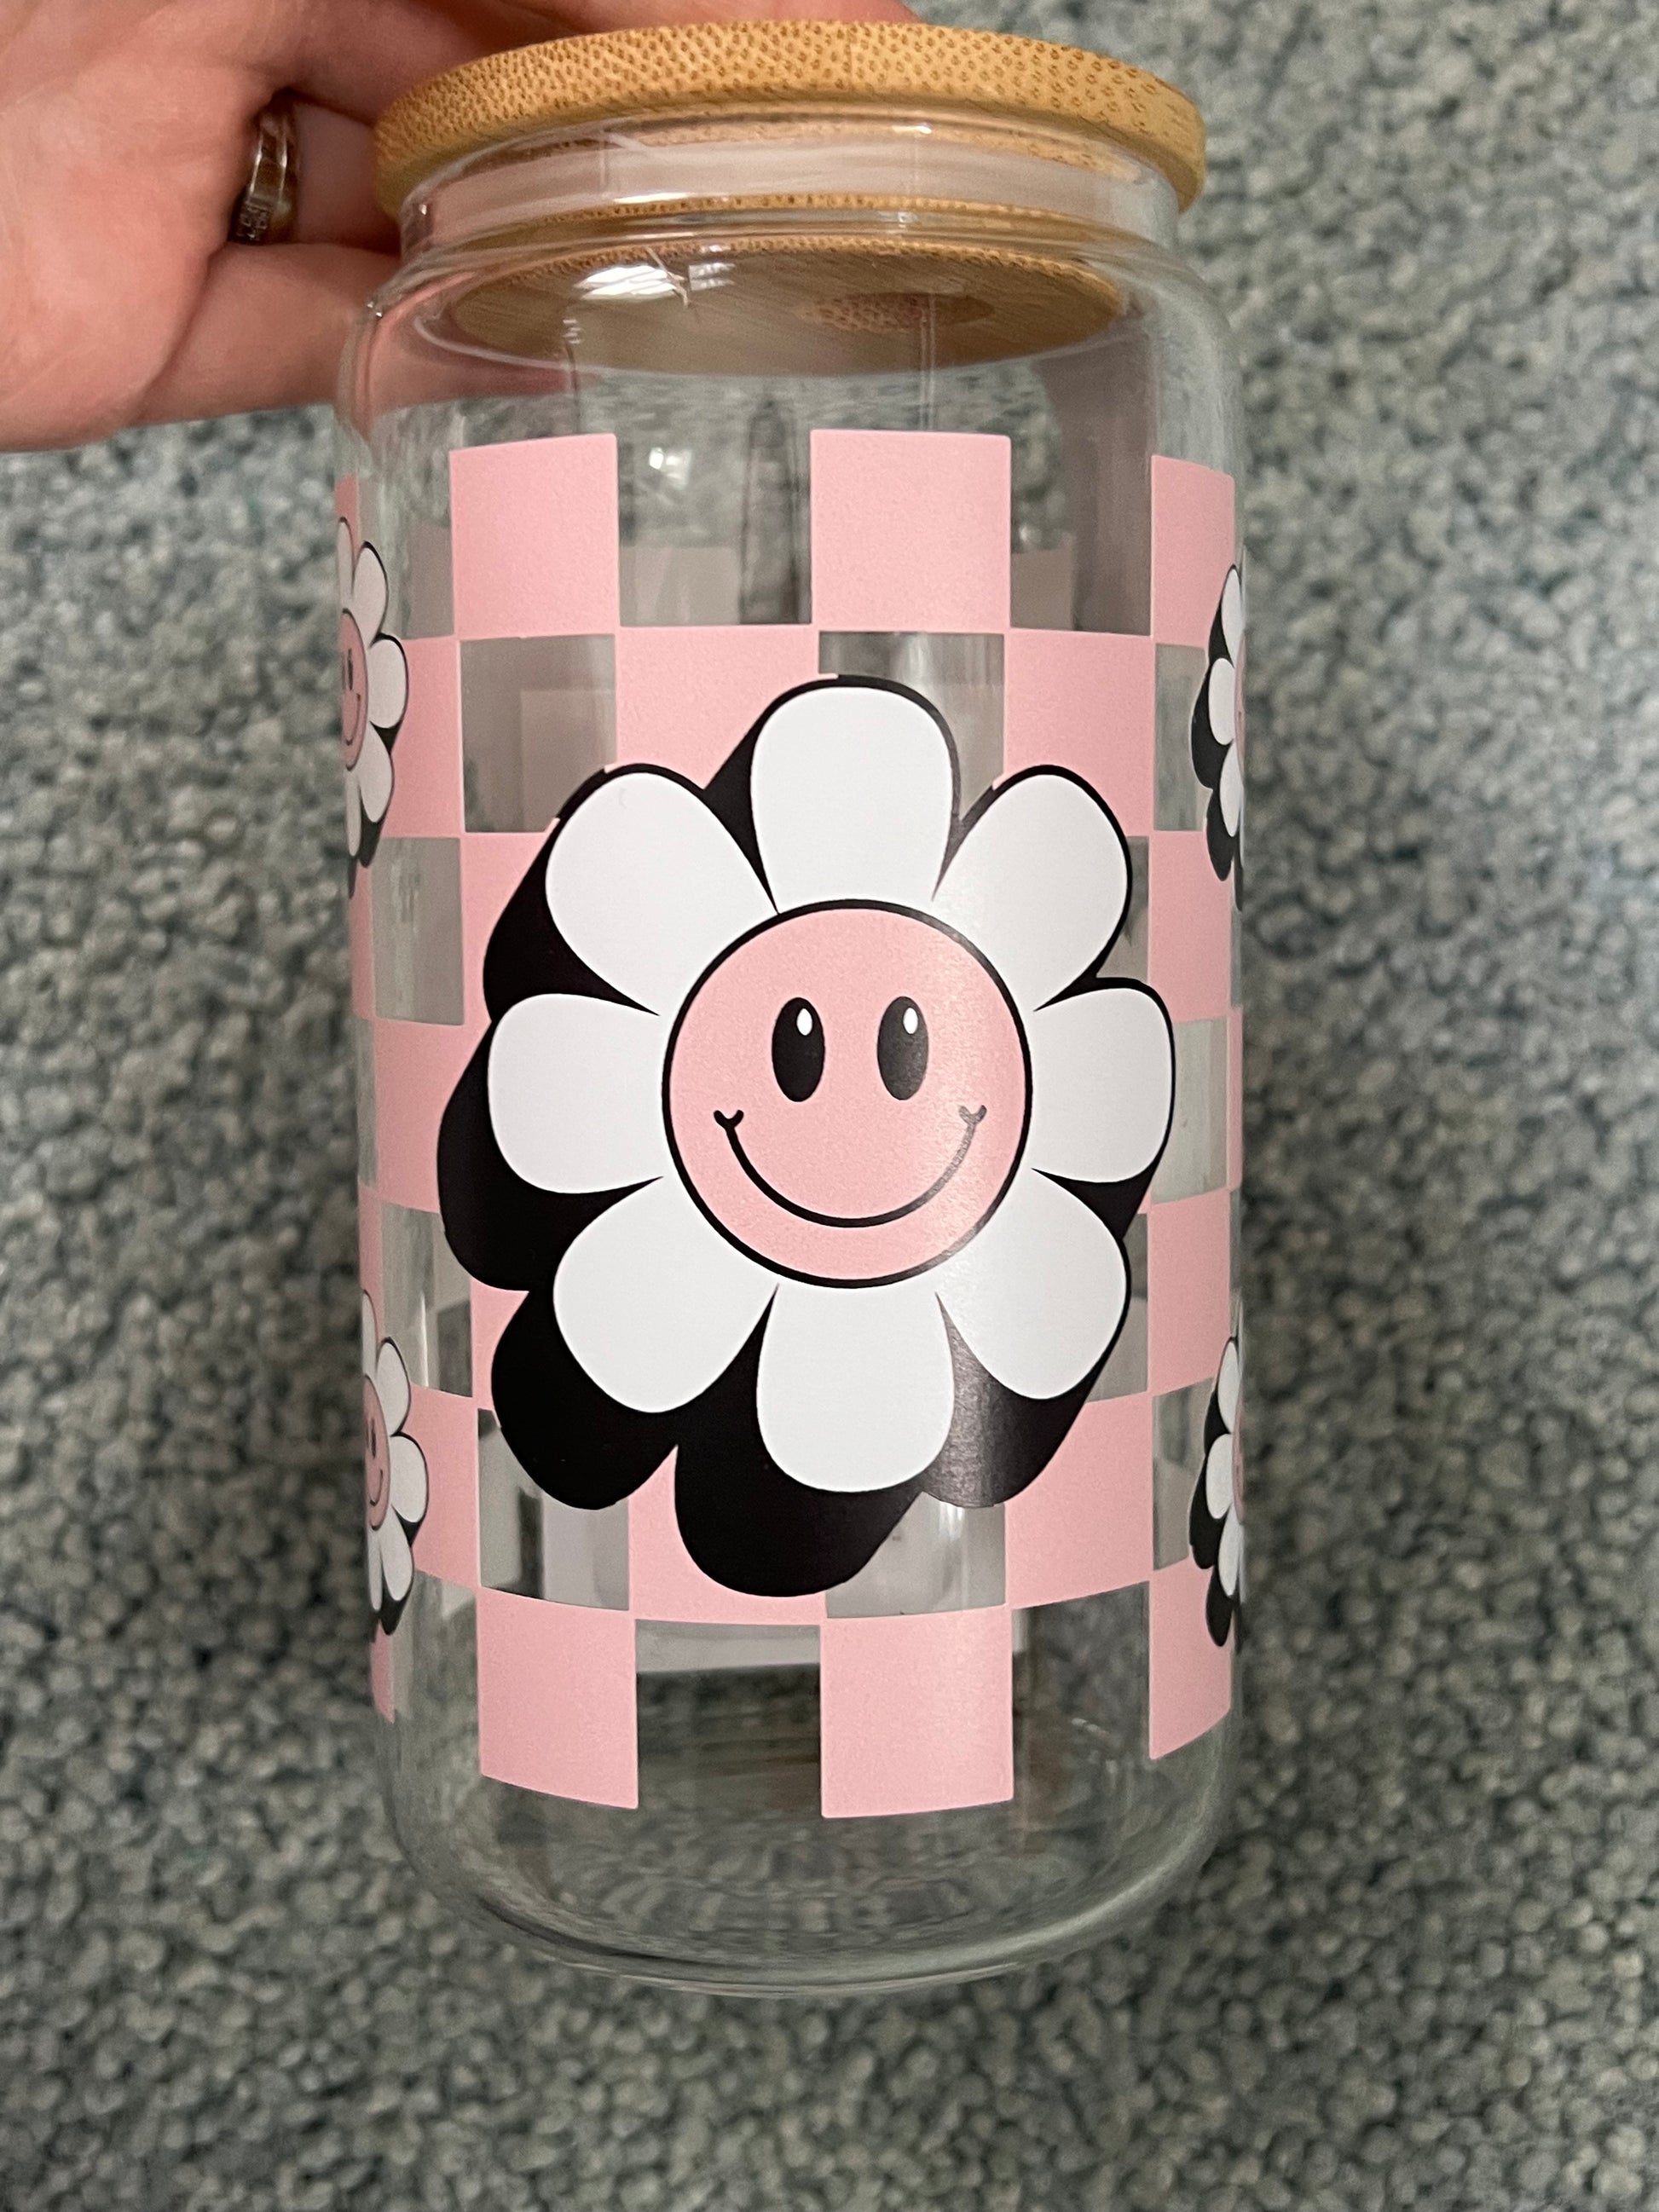 Smiley Glass Cup - Dream Upon A Design, LLC.